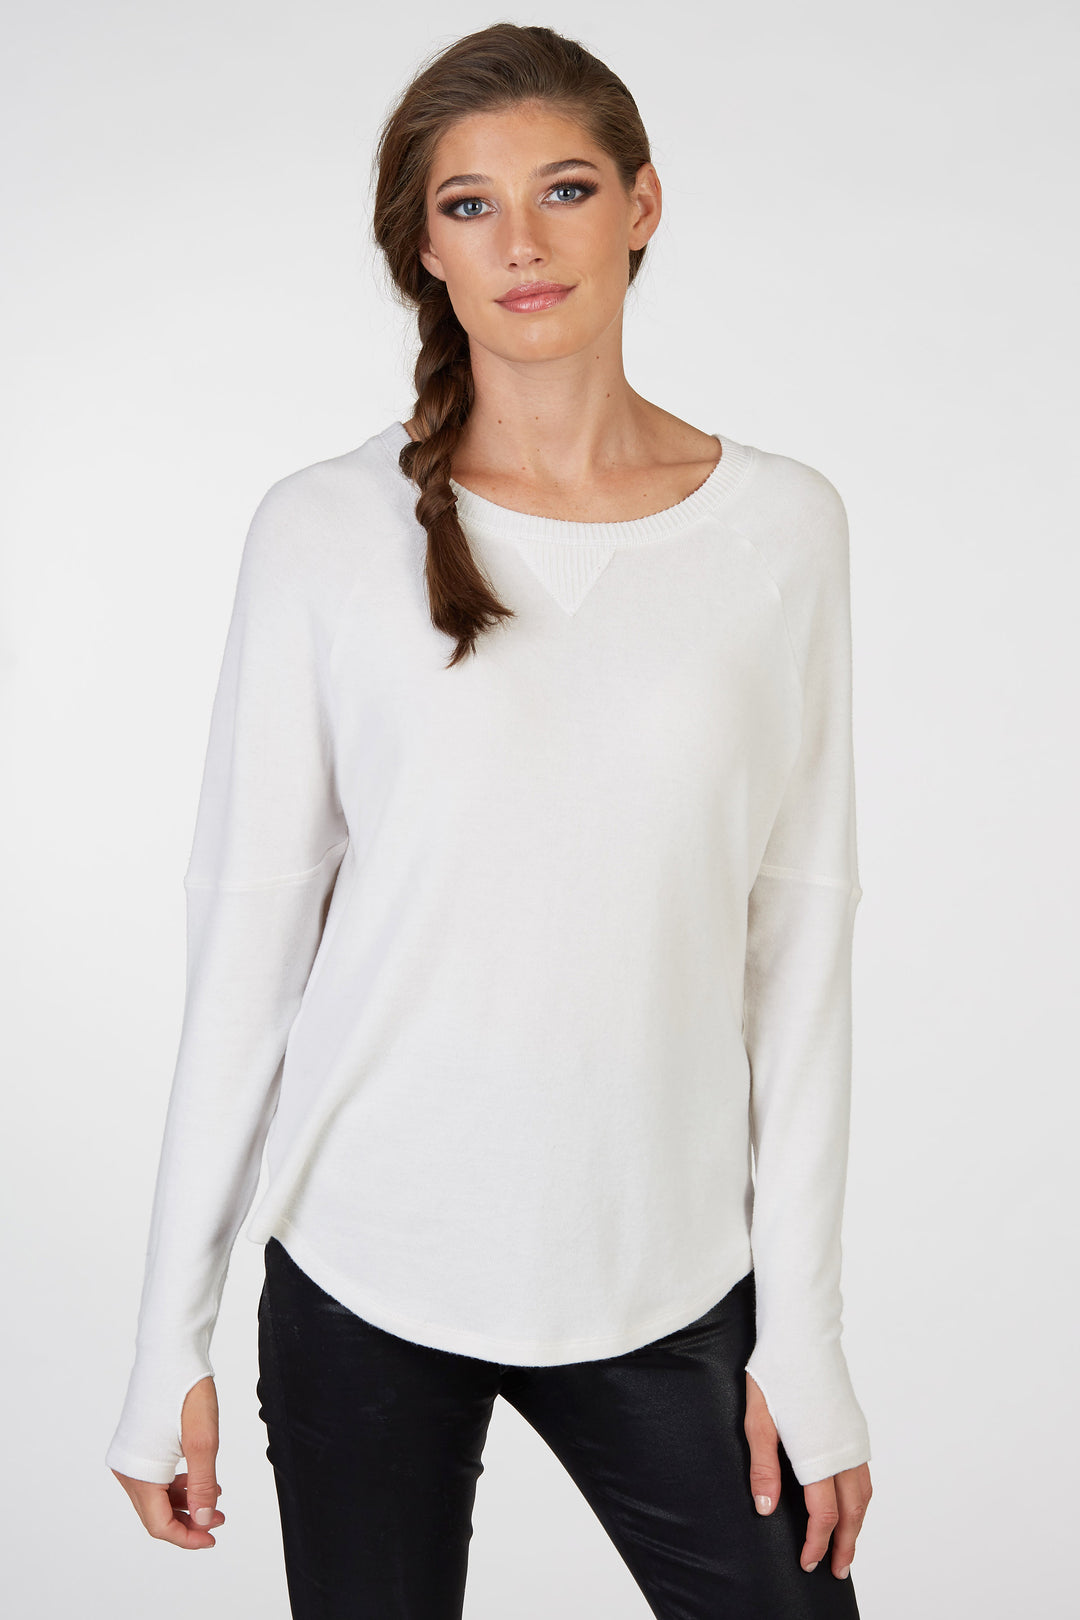 White Heather Knit Top With Thumbhole - Kingfisher Road - Online Boutique